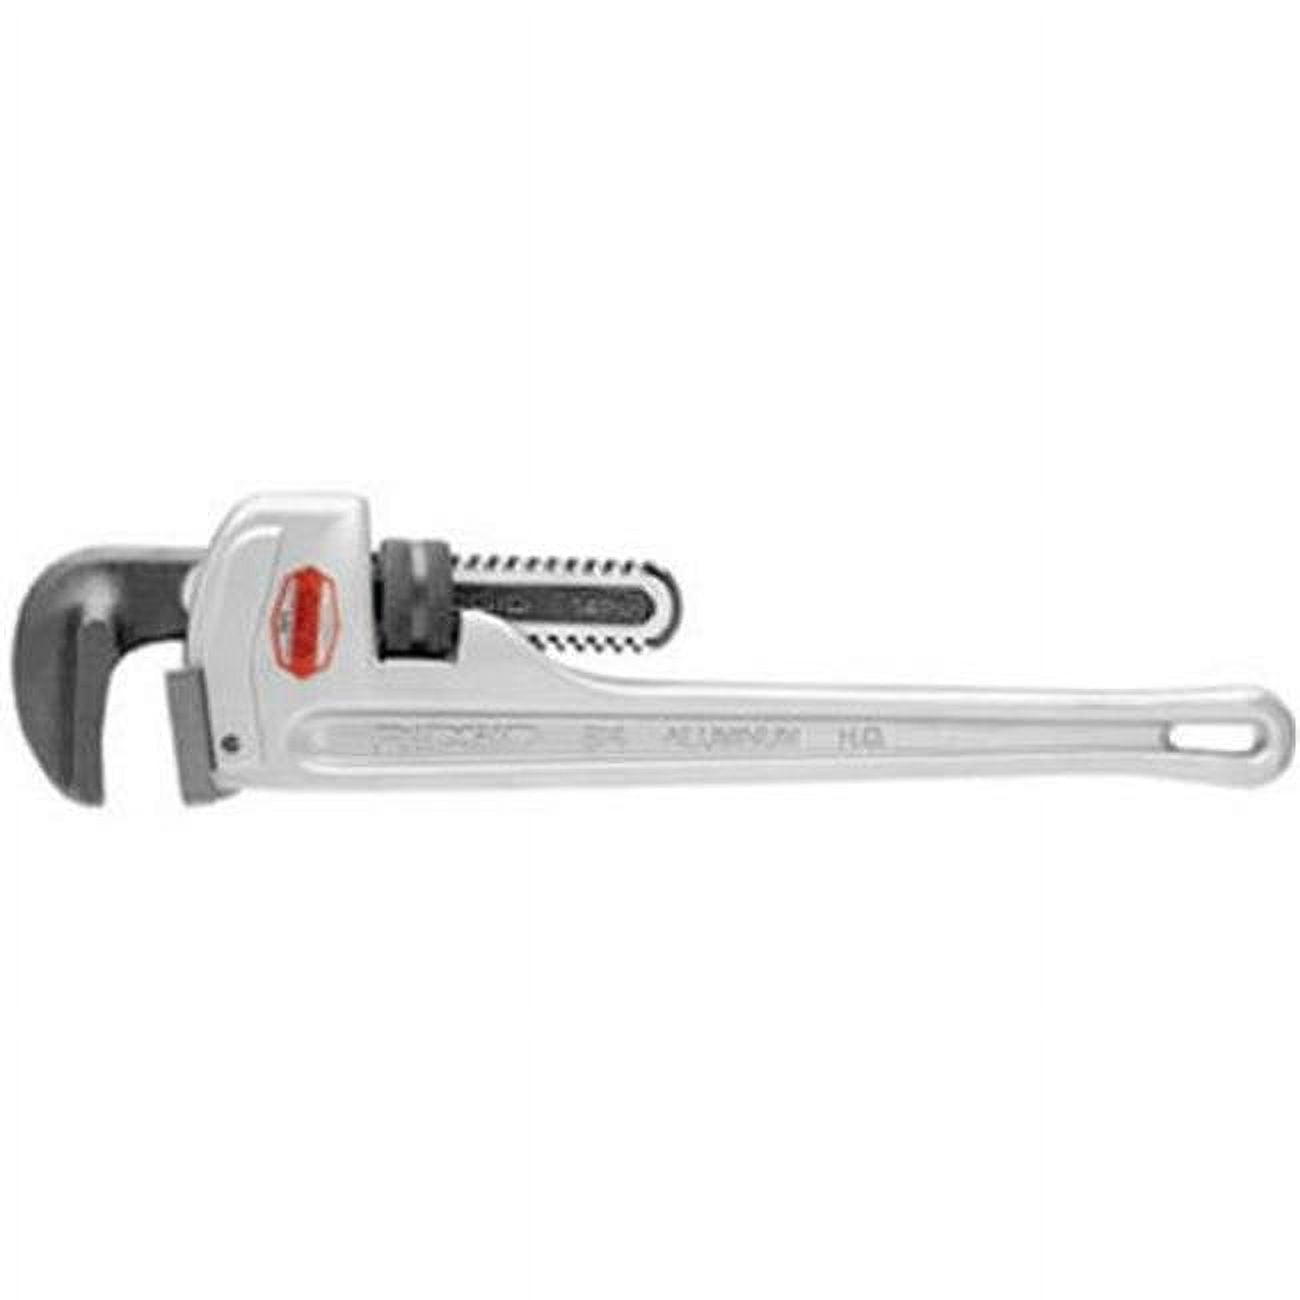 31100 Aluminum Straight Pipe Wrench - 18 In. Plumbing Wrench